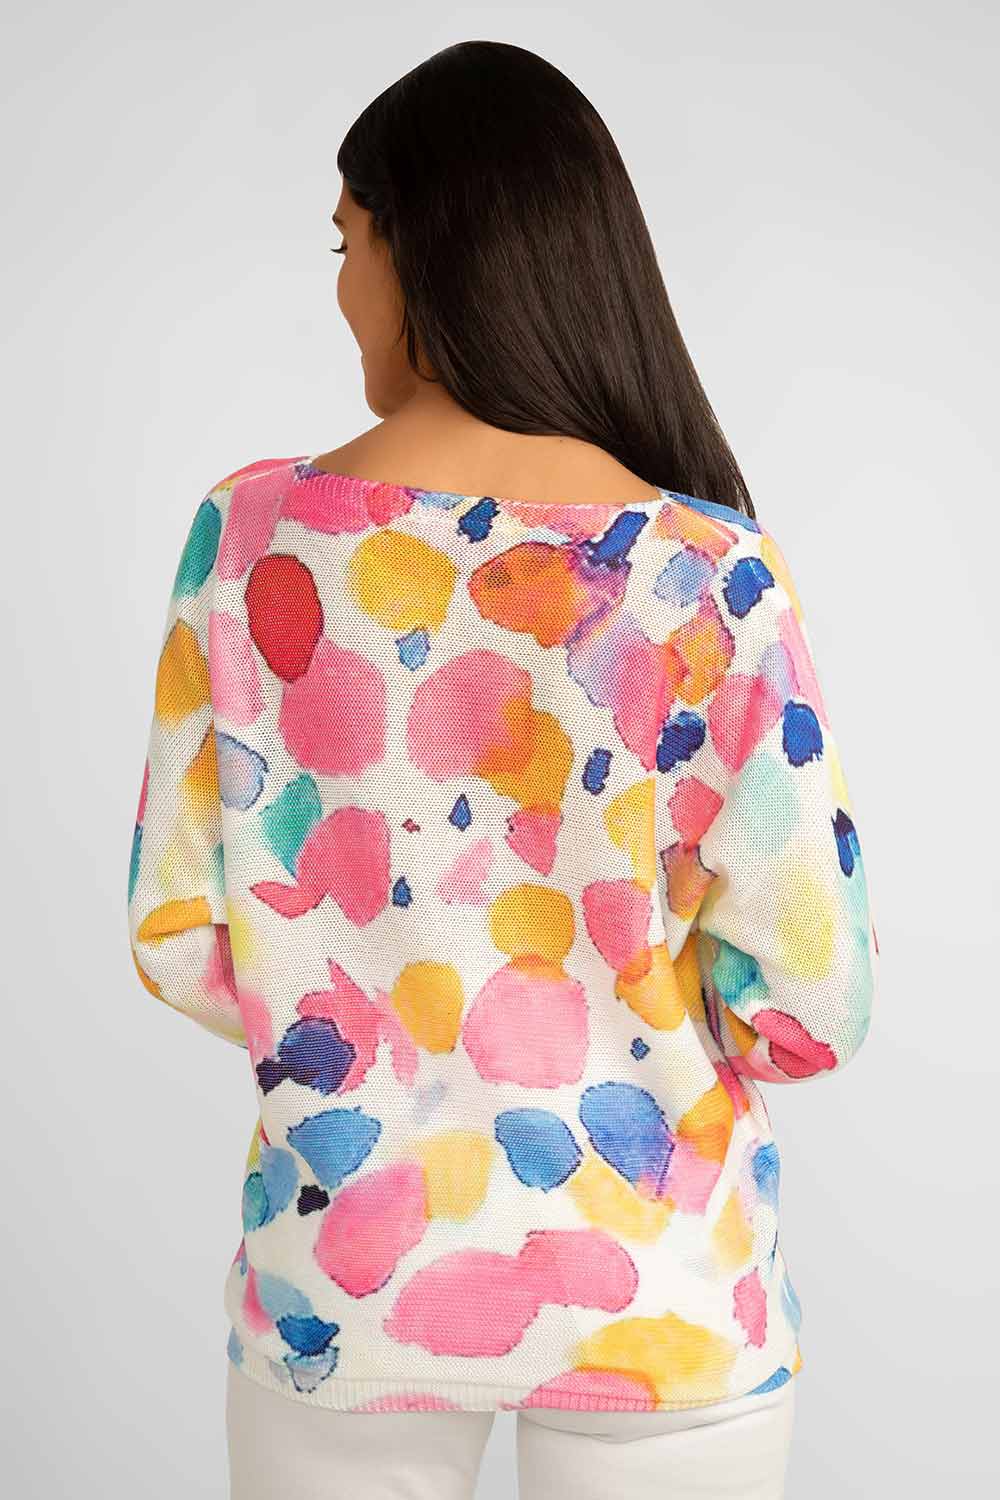 Back view of Carre Noir (6802) Women's Long Sleeve Printed Dot Lightweight Pullover Sweater in a pink dot print accented by blues and yellows